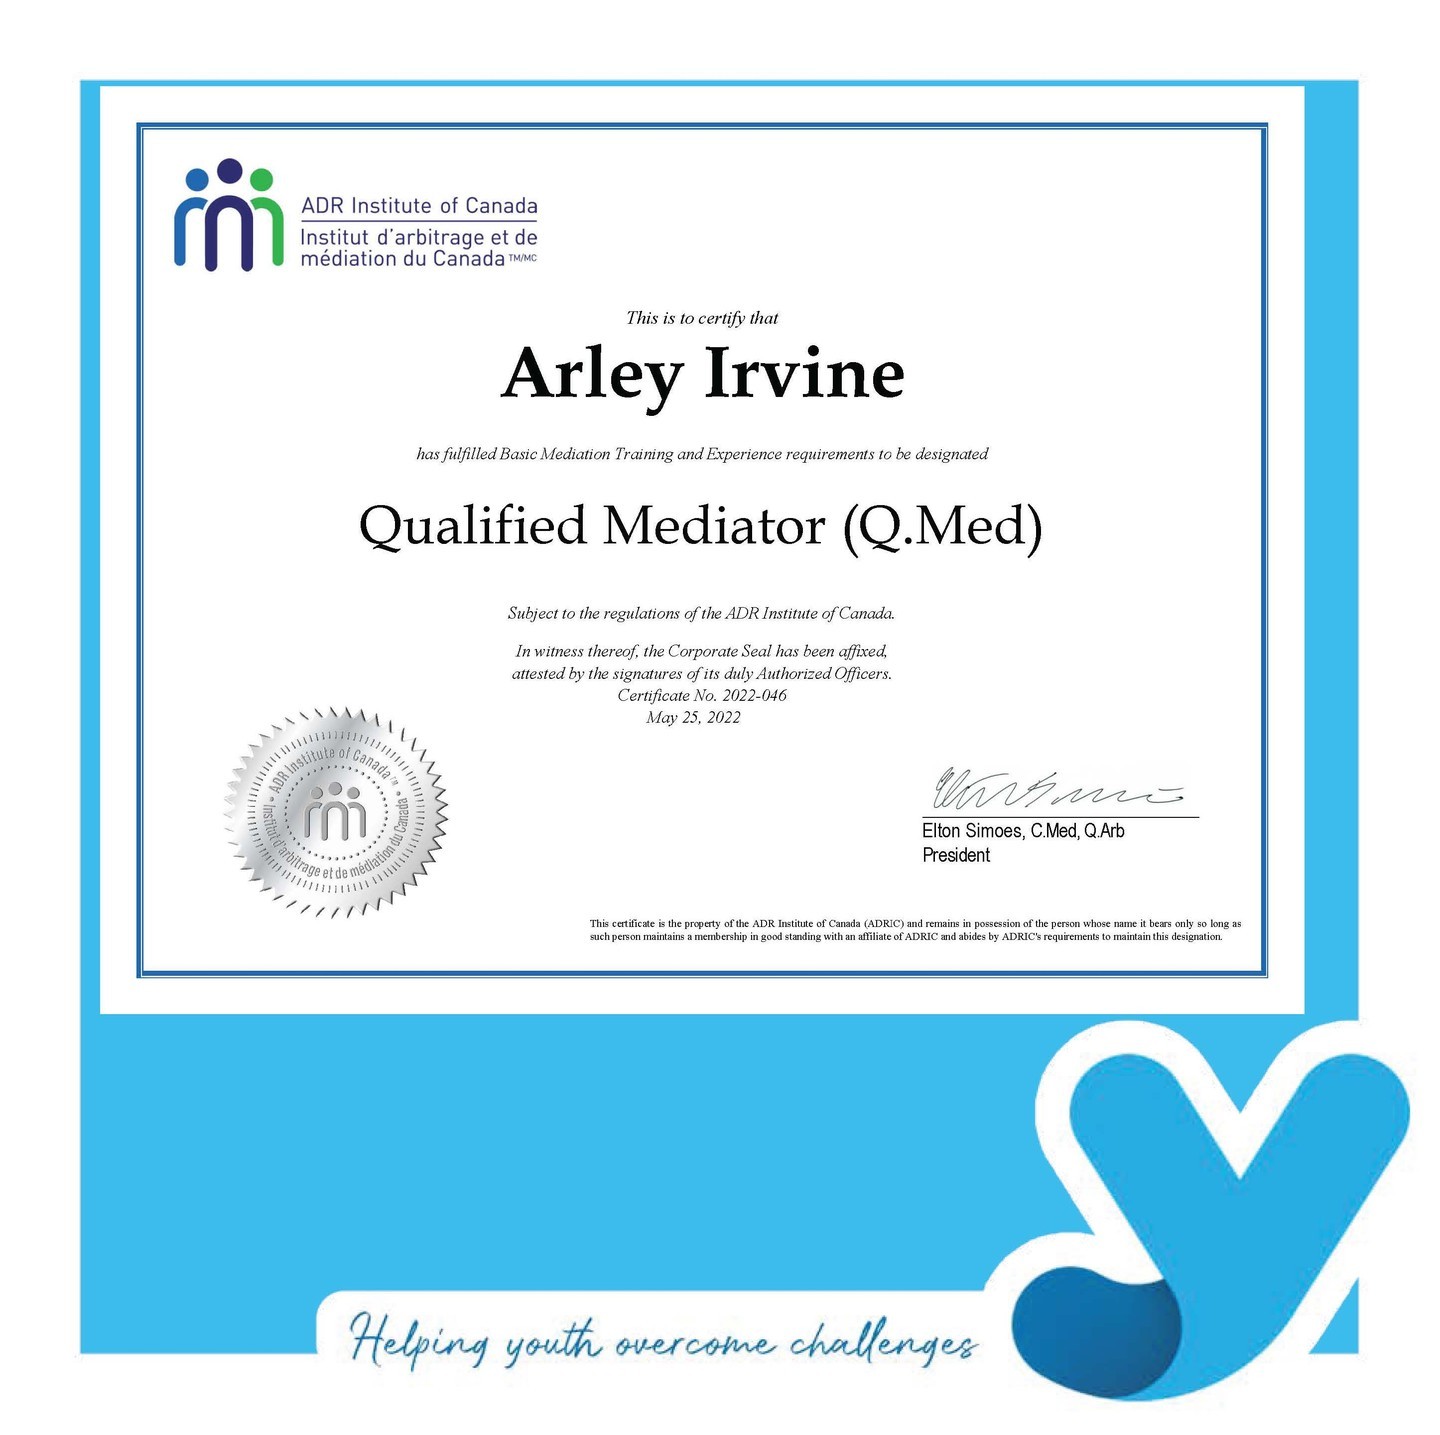 Arley Irvine, one half of our MEND Intervention Team, has recently been certified as a Qualified Mediator through the ADR Institute of Canada.  Congratulations Arely on this significant achievement as you continue to enhance your skills to support students in KFLA.